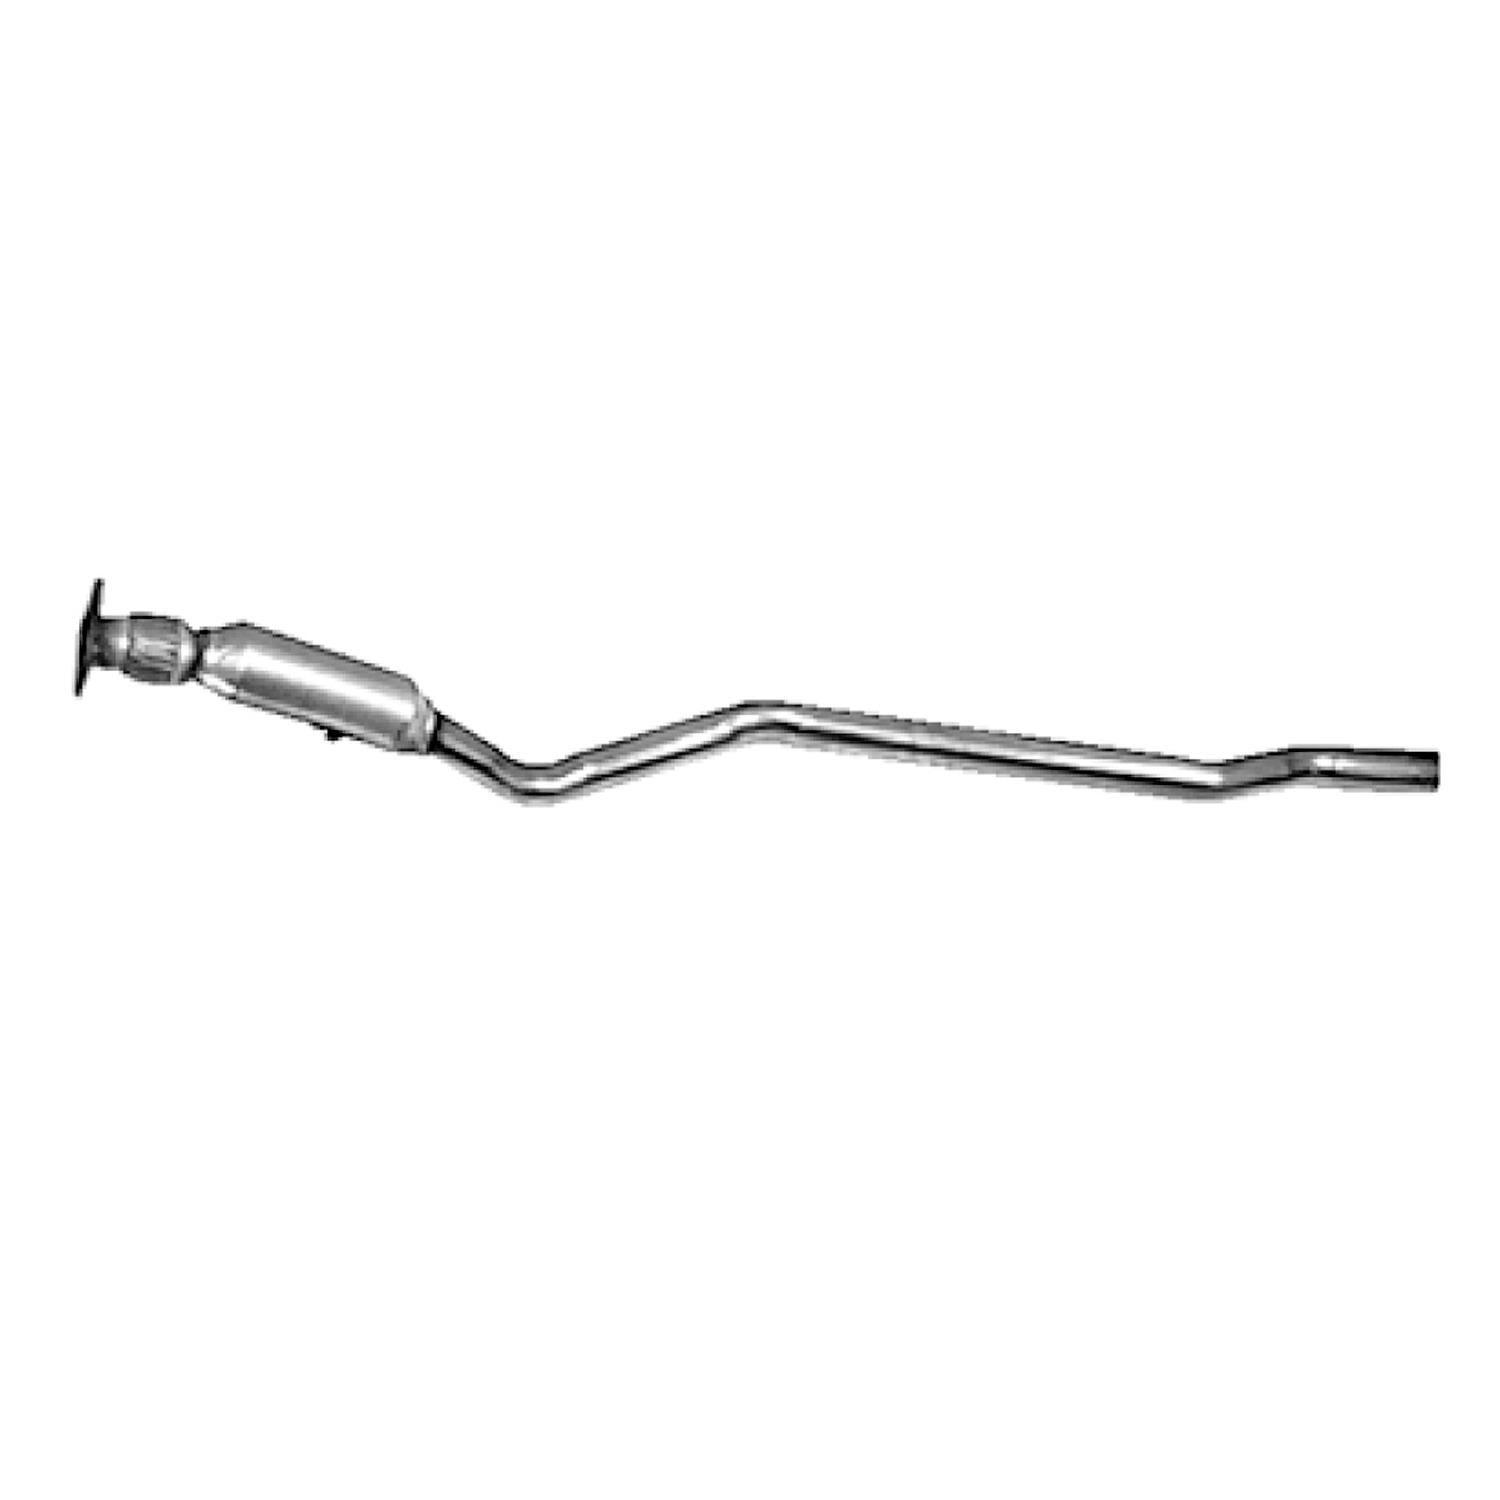 Flowmaster 2034269 Catalytic Converter Direct Fit 49 State Stainless